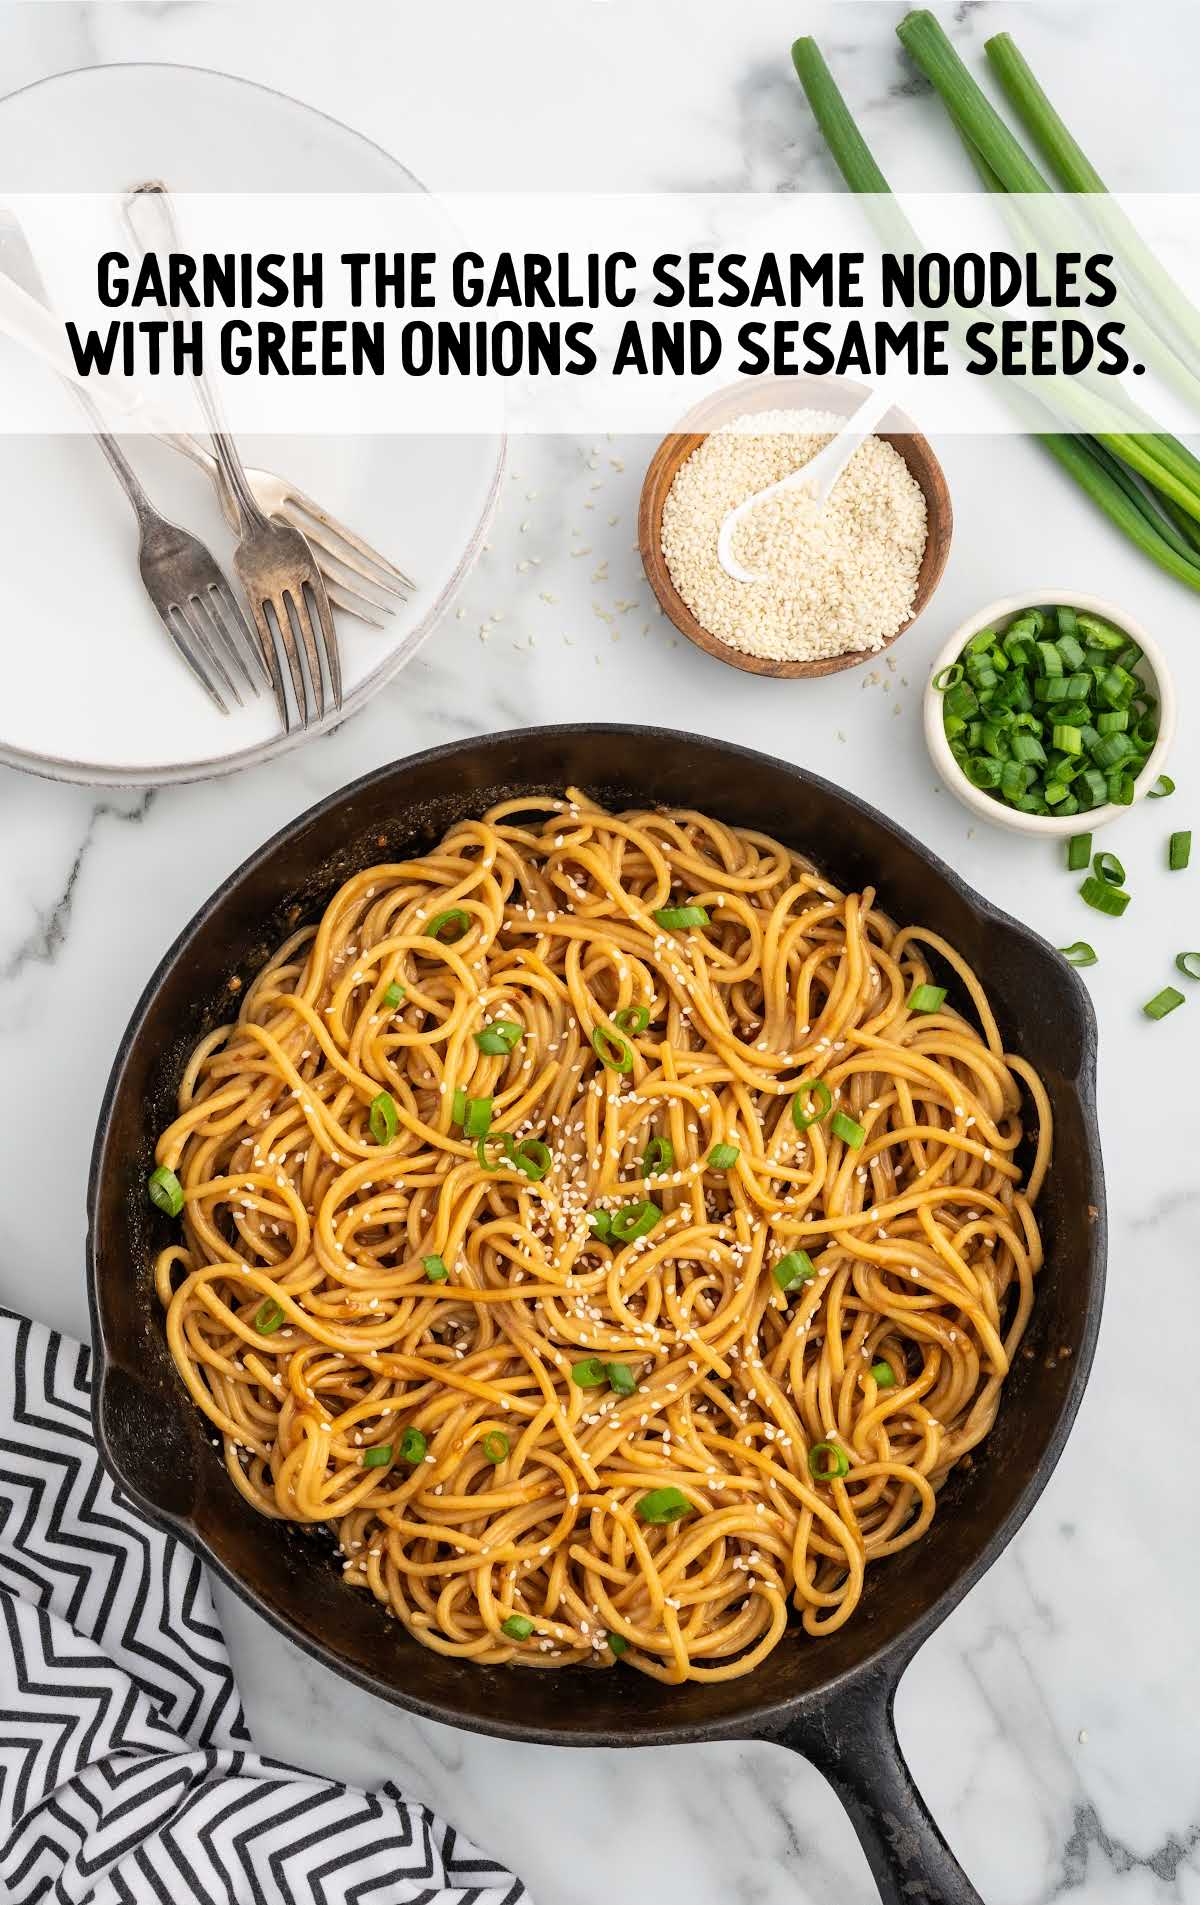 galric sesame noodles garnished with green onions and sesame seeds